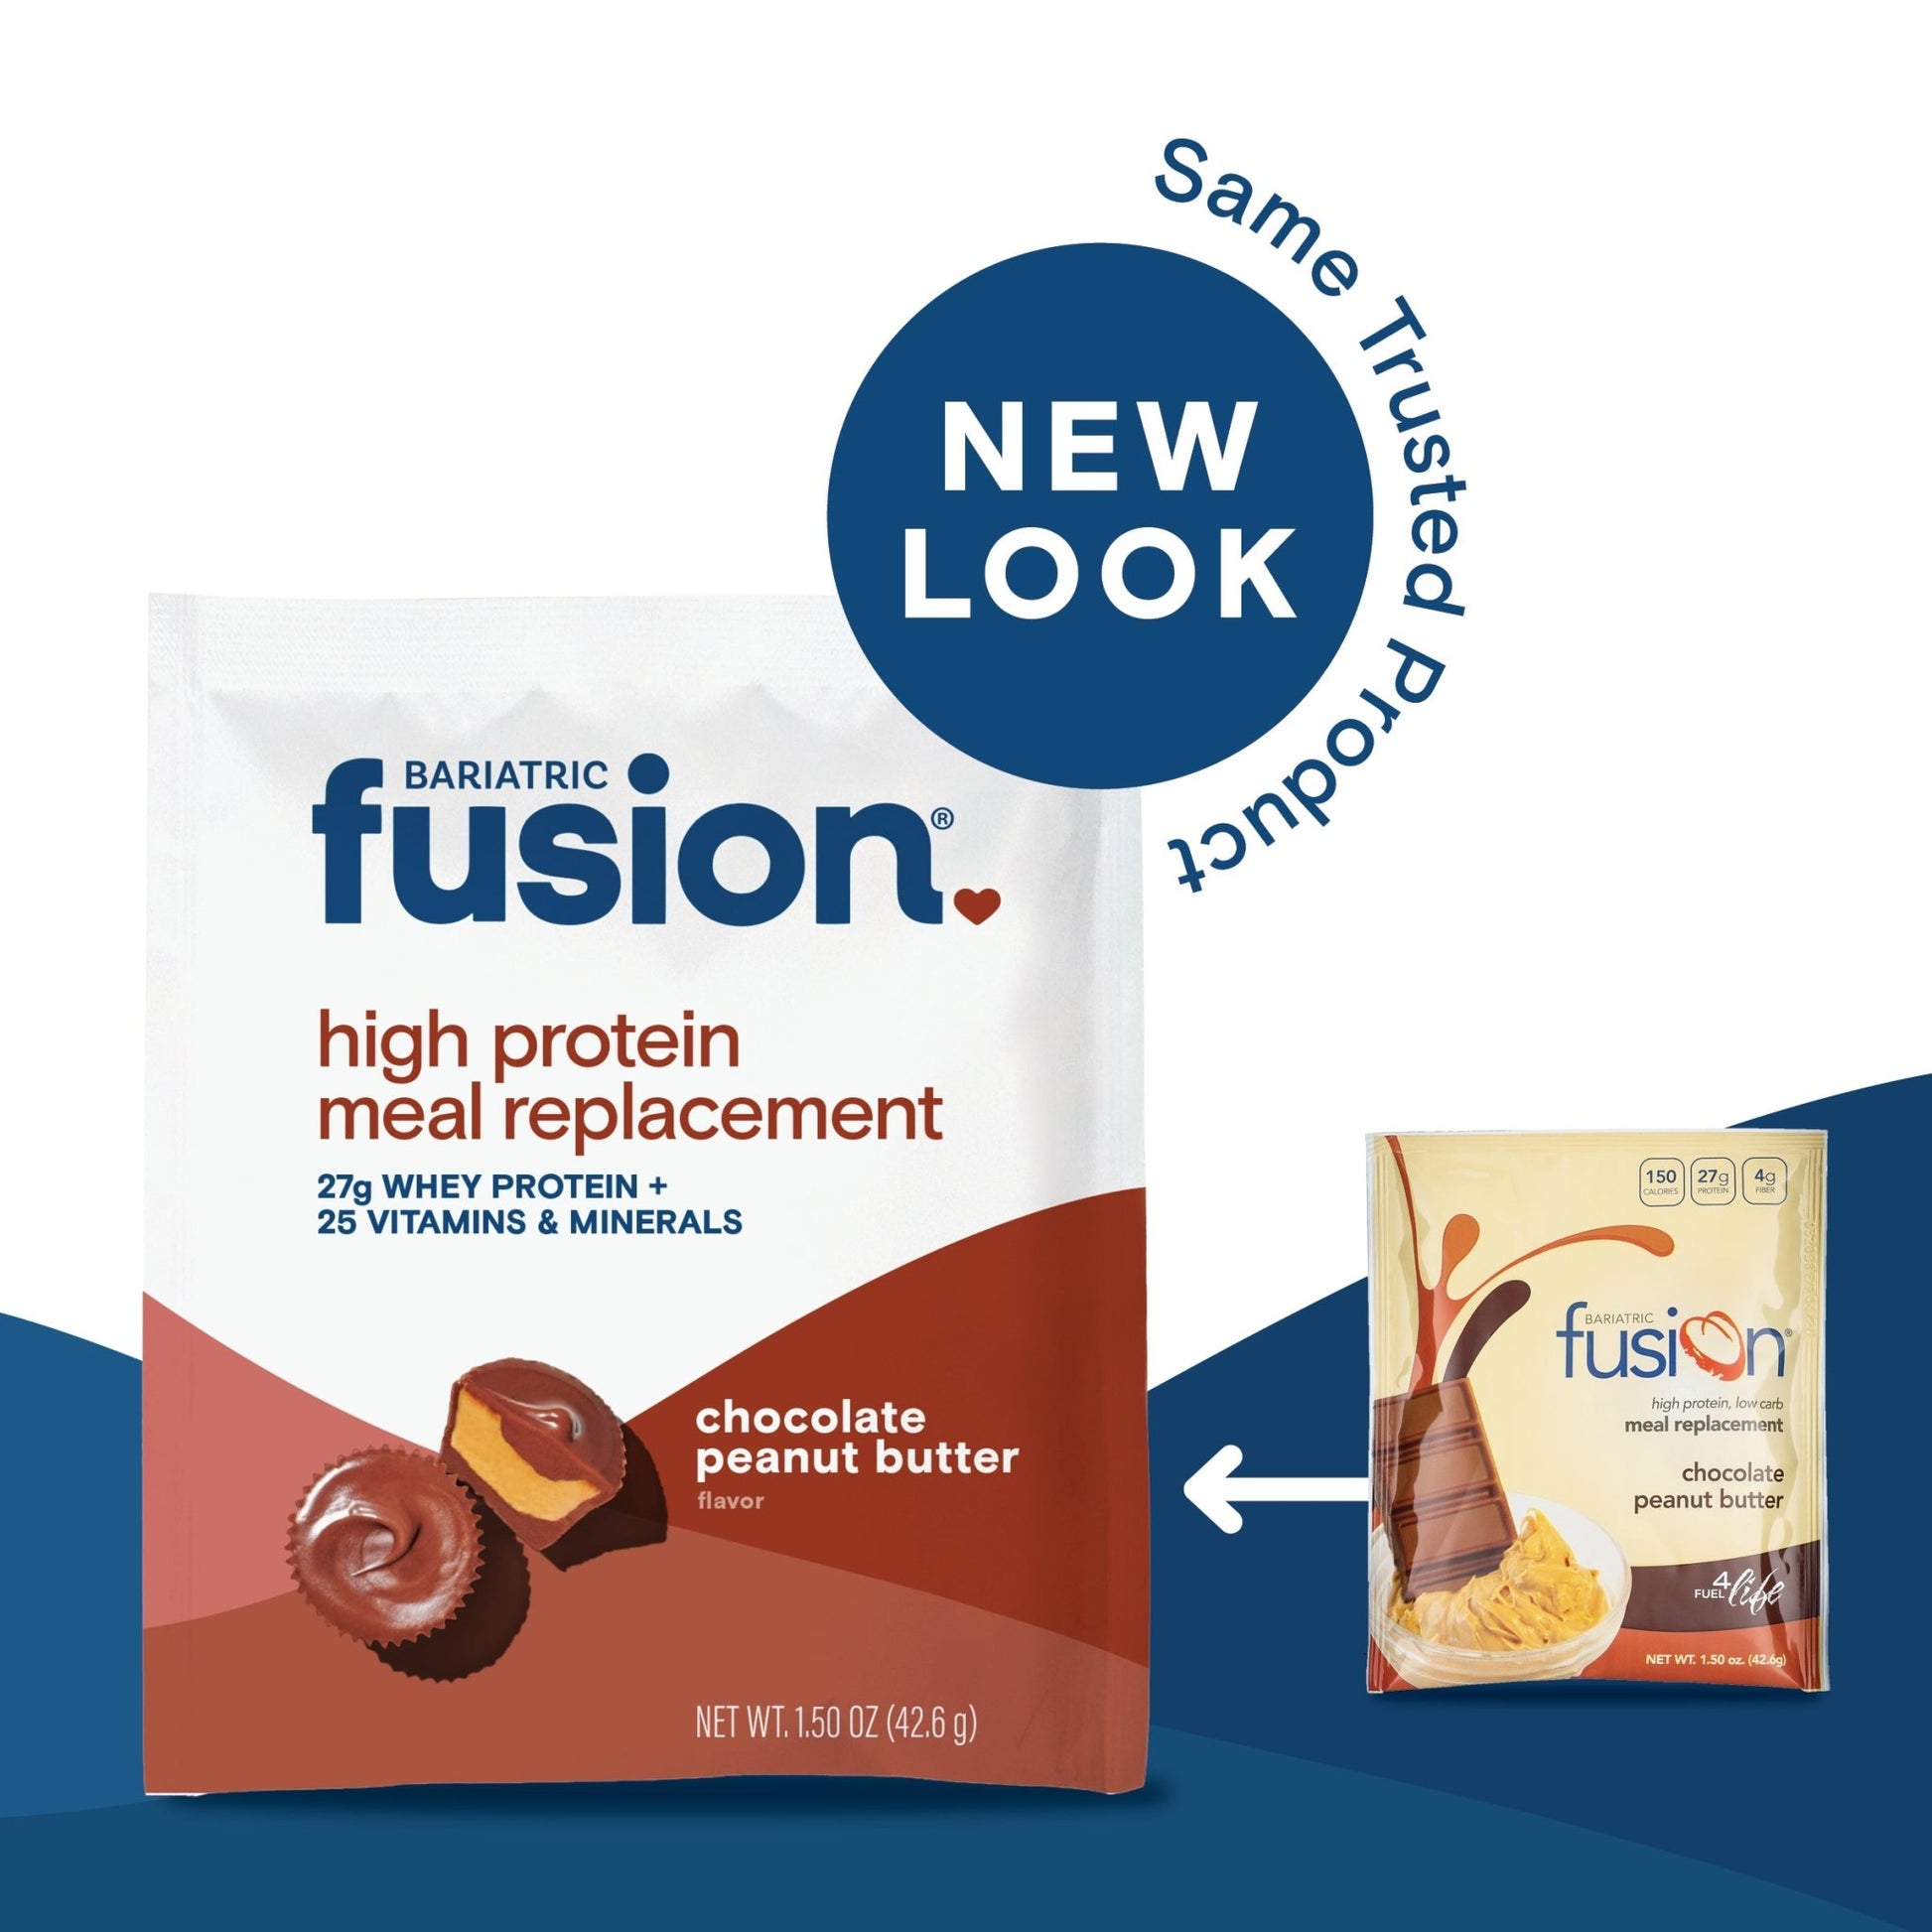 Bariatric Fusion Chocolate Peanut Butter High Protein Meal Replacement single serving new look, same great product.